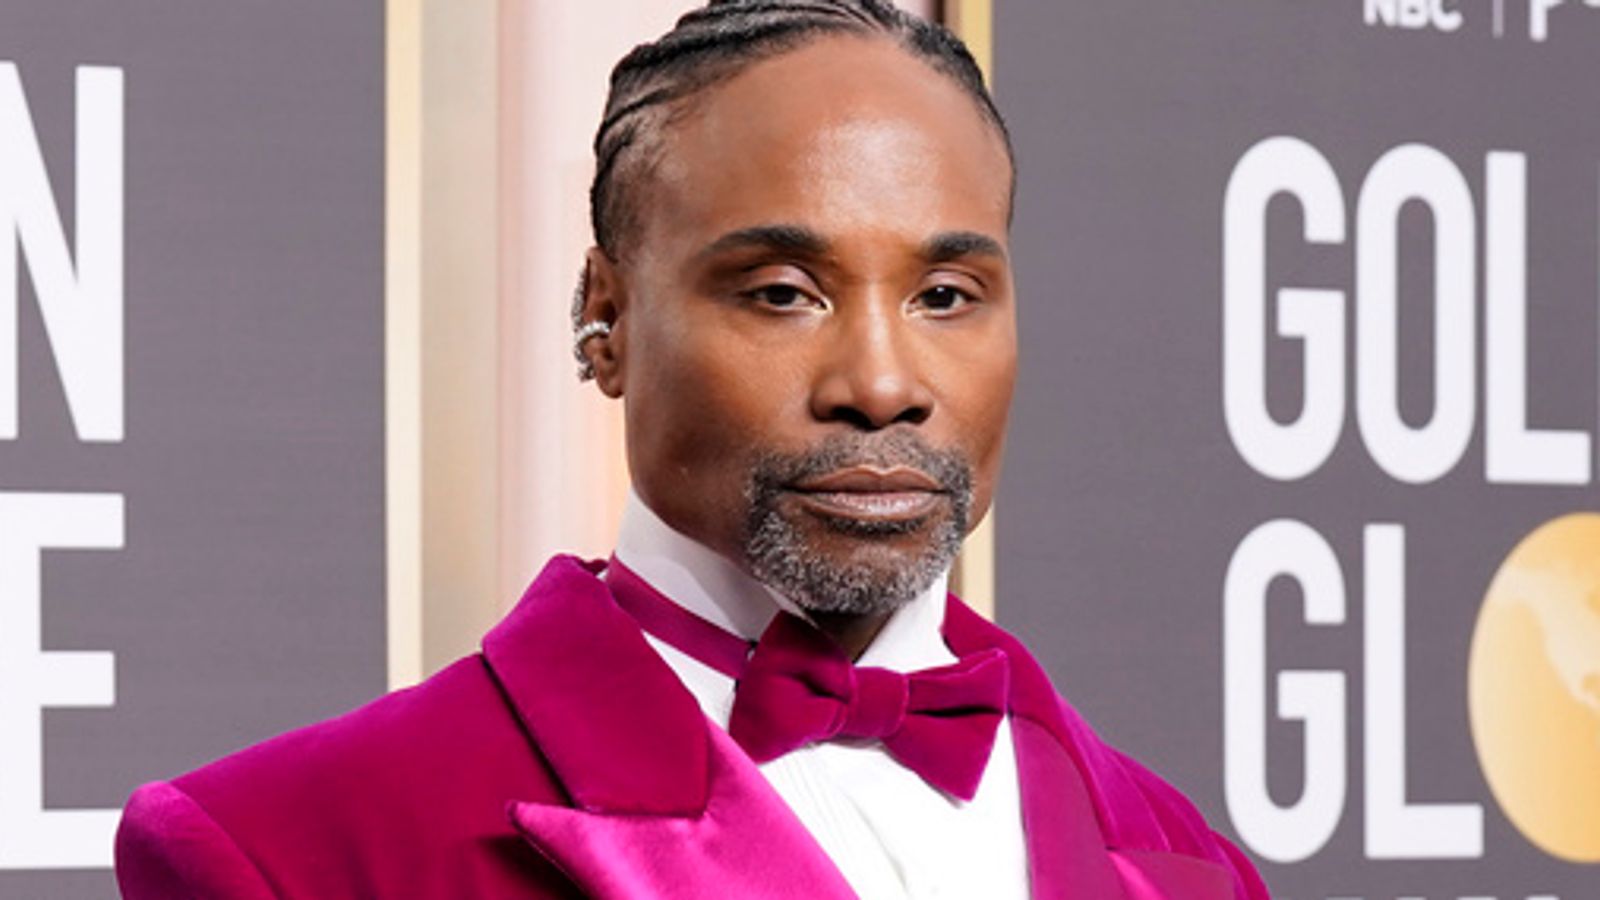 Actors' strike: Billy Porter says he will have to sell his house because of uncertainty